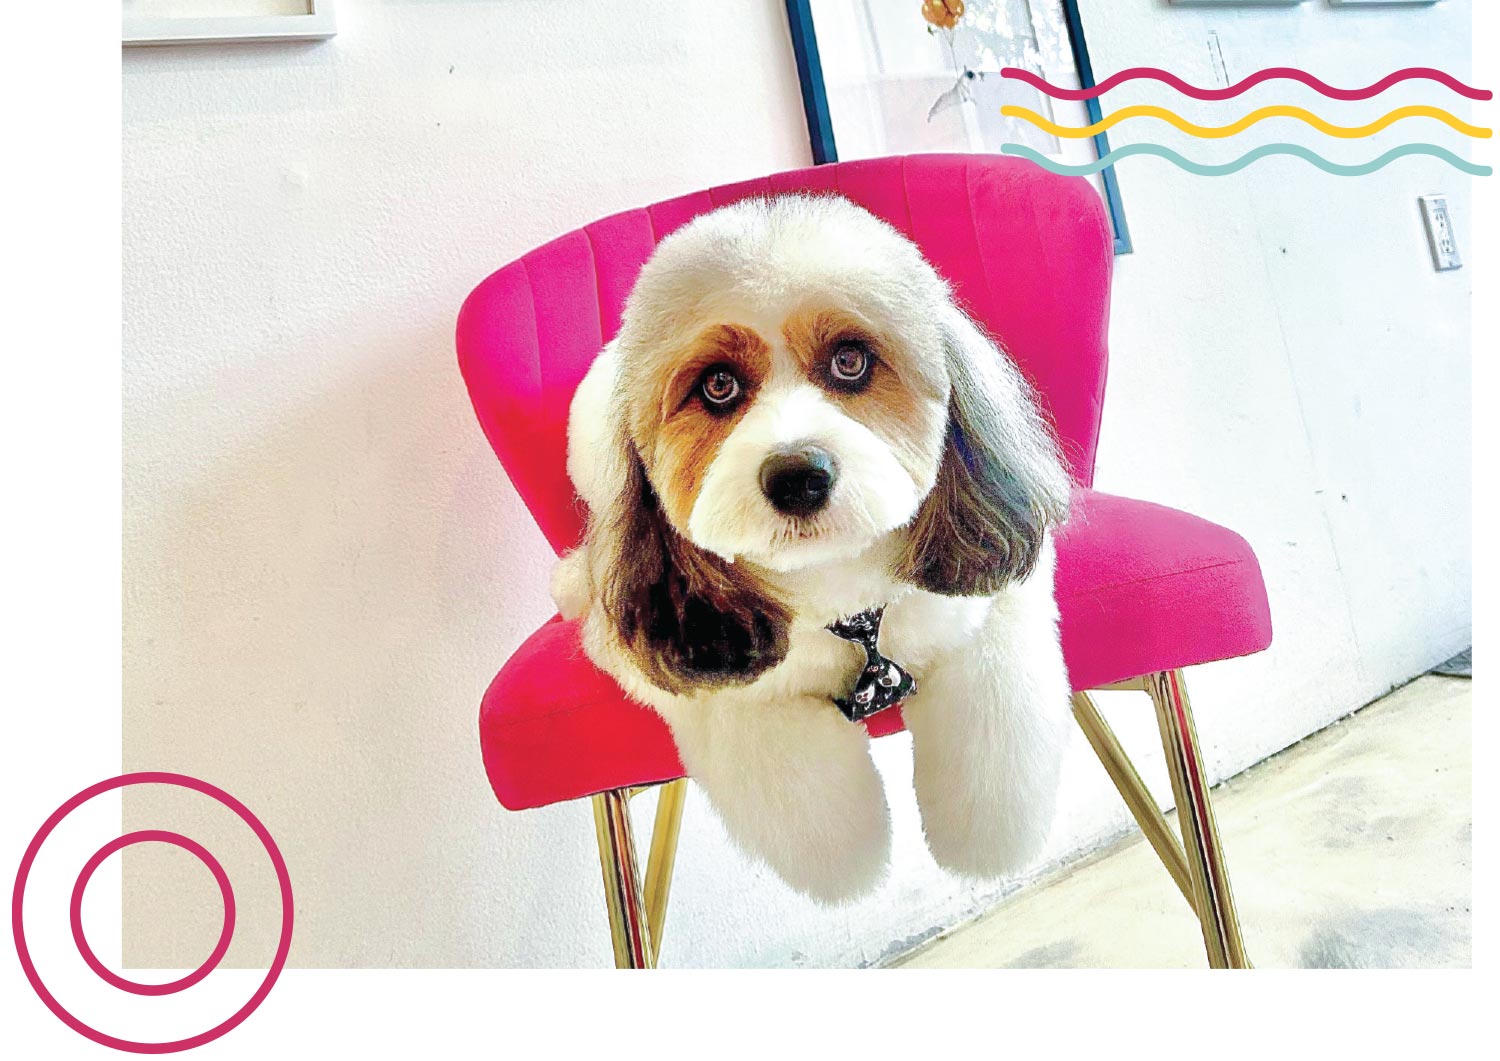 close up of a long haired, floppy eared white and brown dog, sitting on a pink cushioned chair and wearing a chicken patterned tie